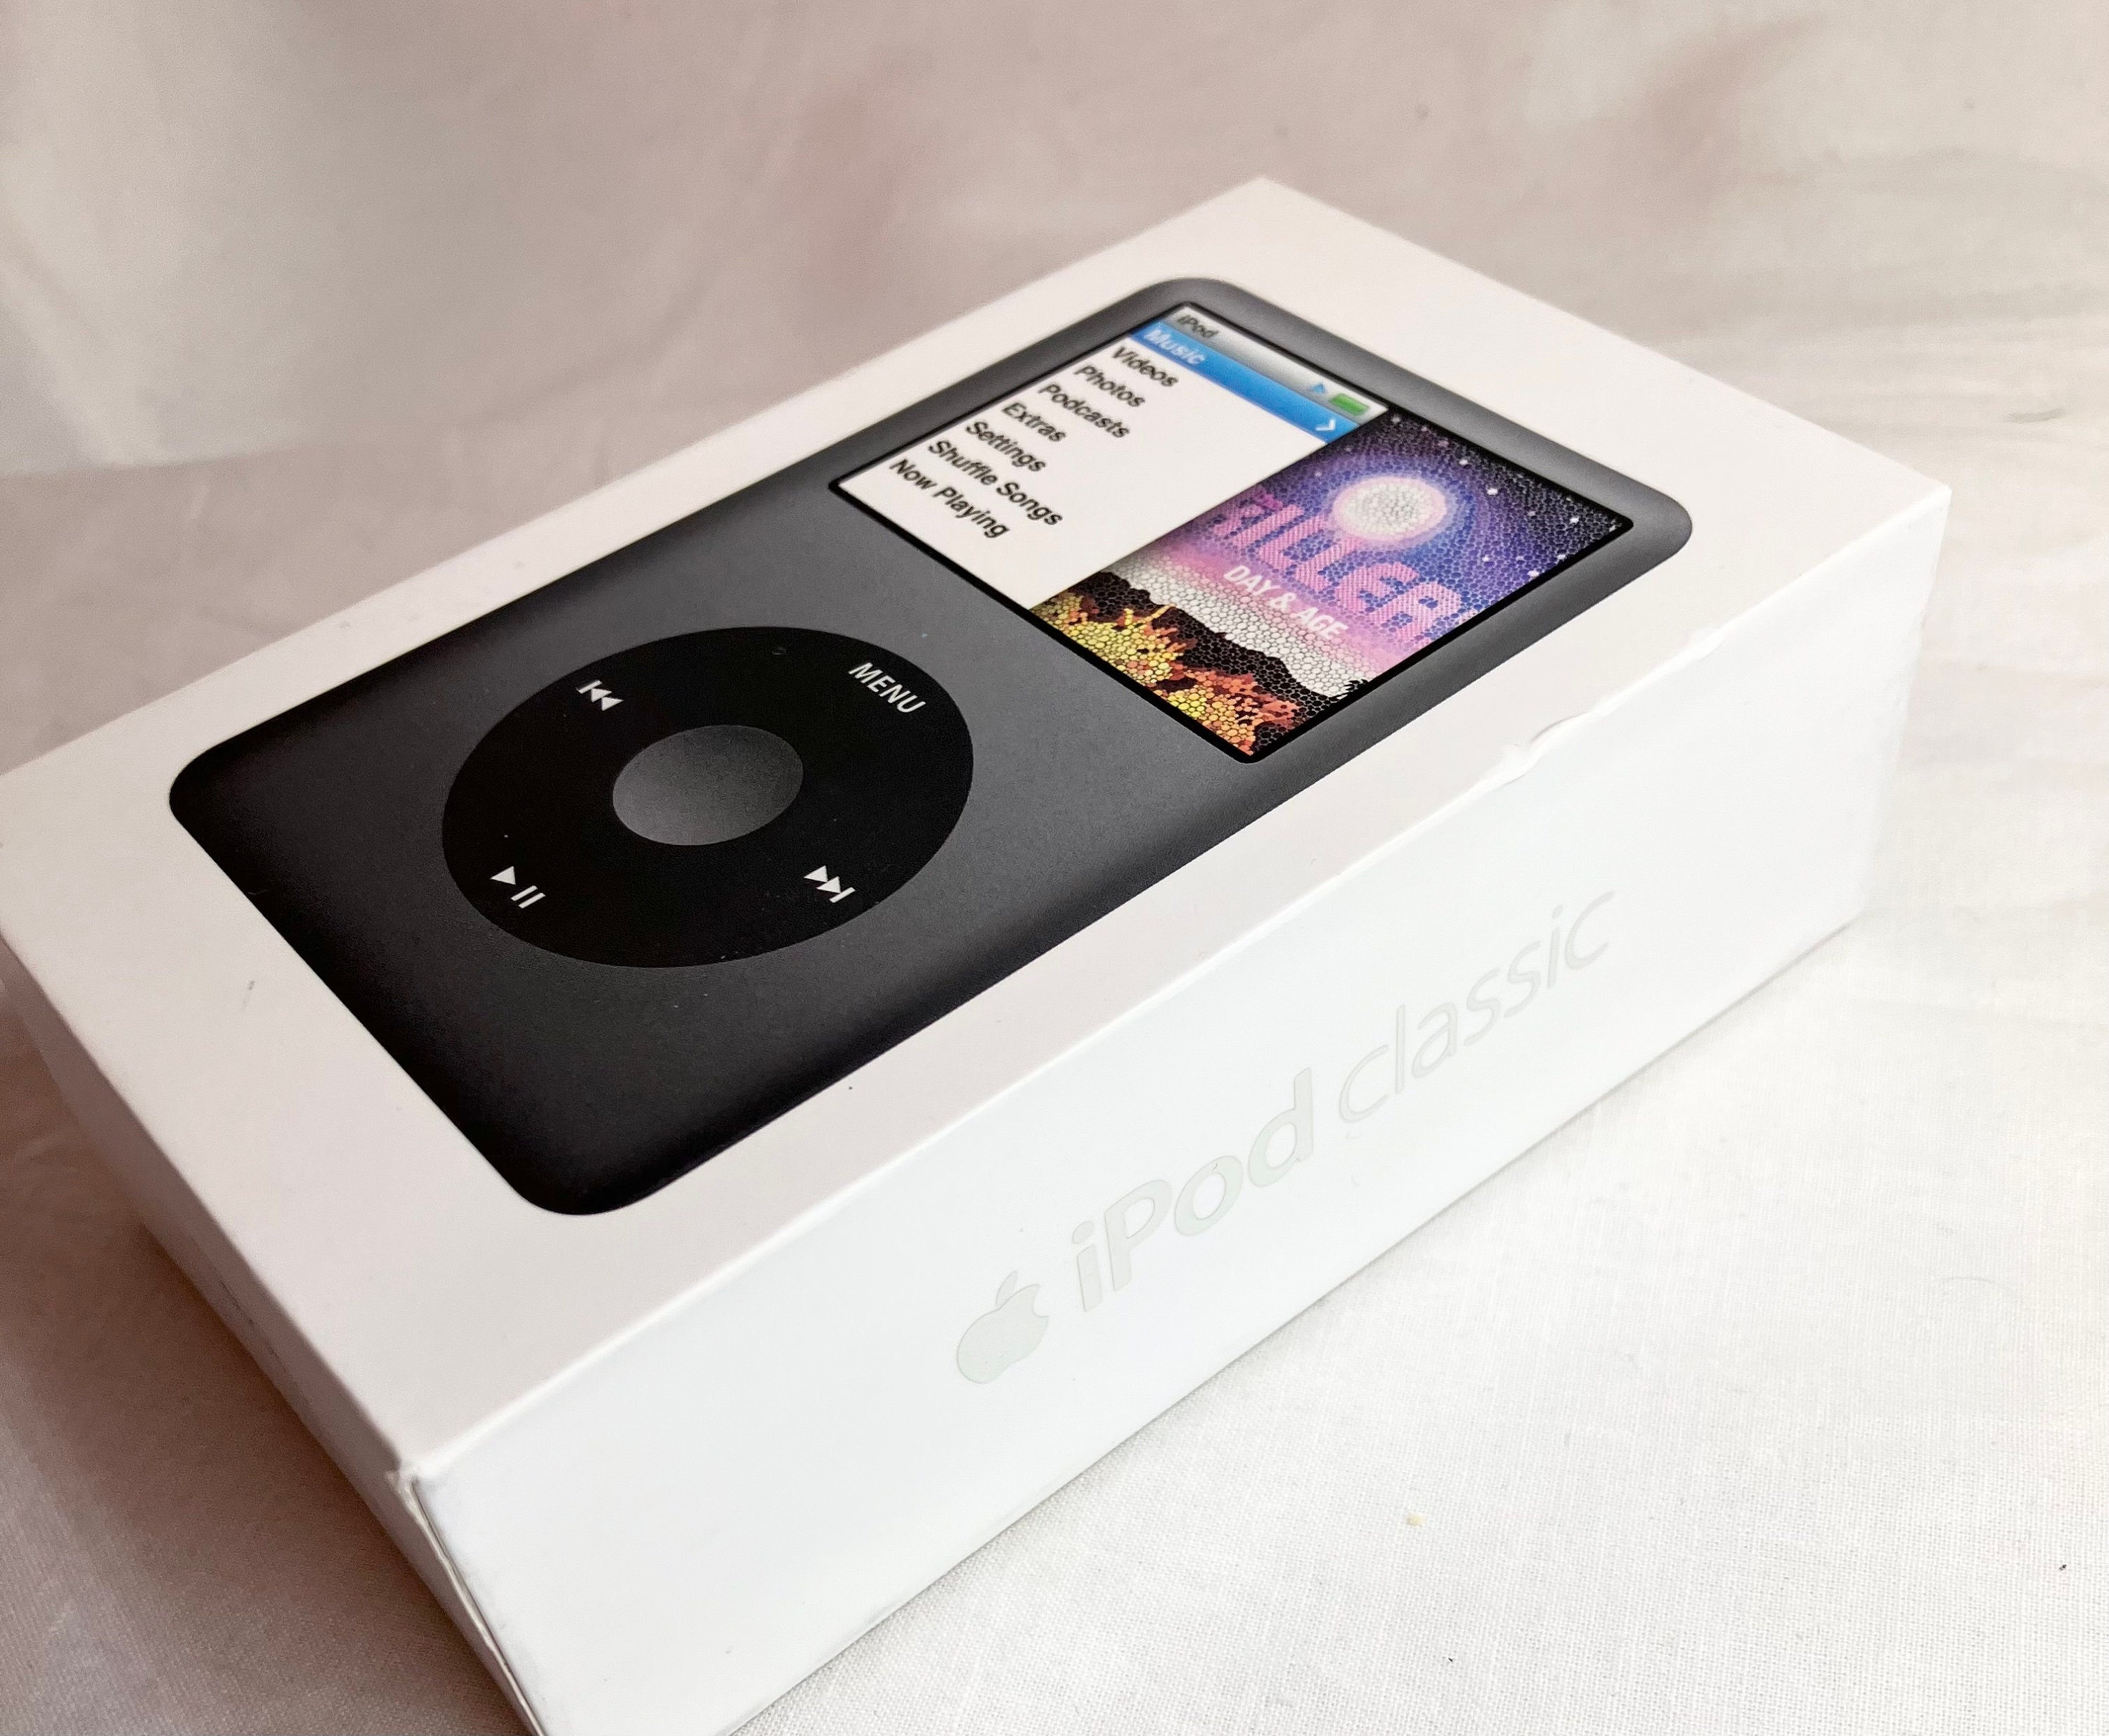 Apple Ipod Classic 7th Gen A1238 160GB MC297LL in Box With - Etsy